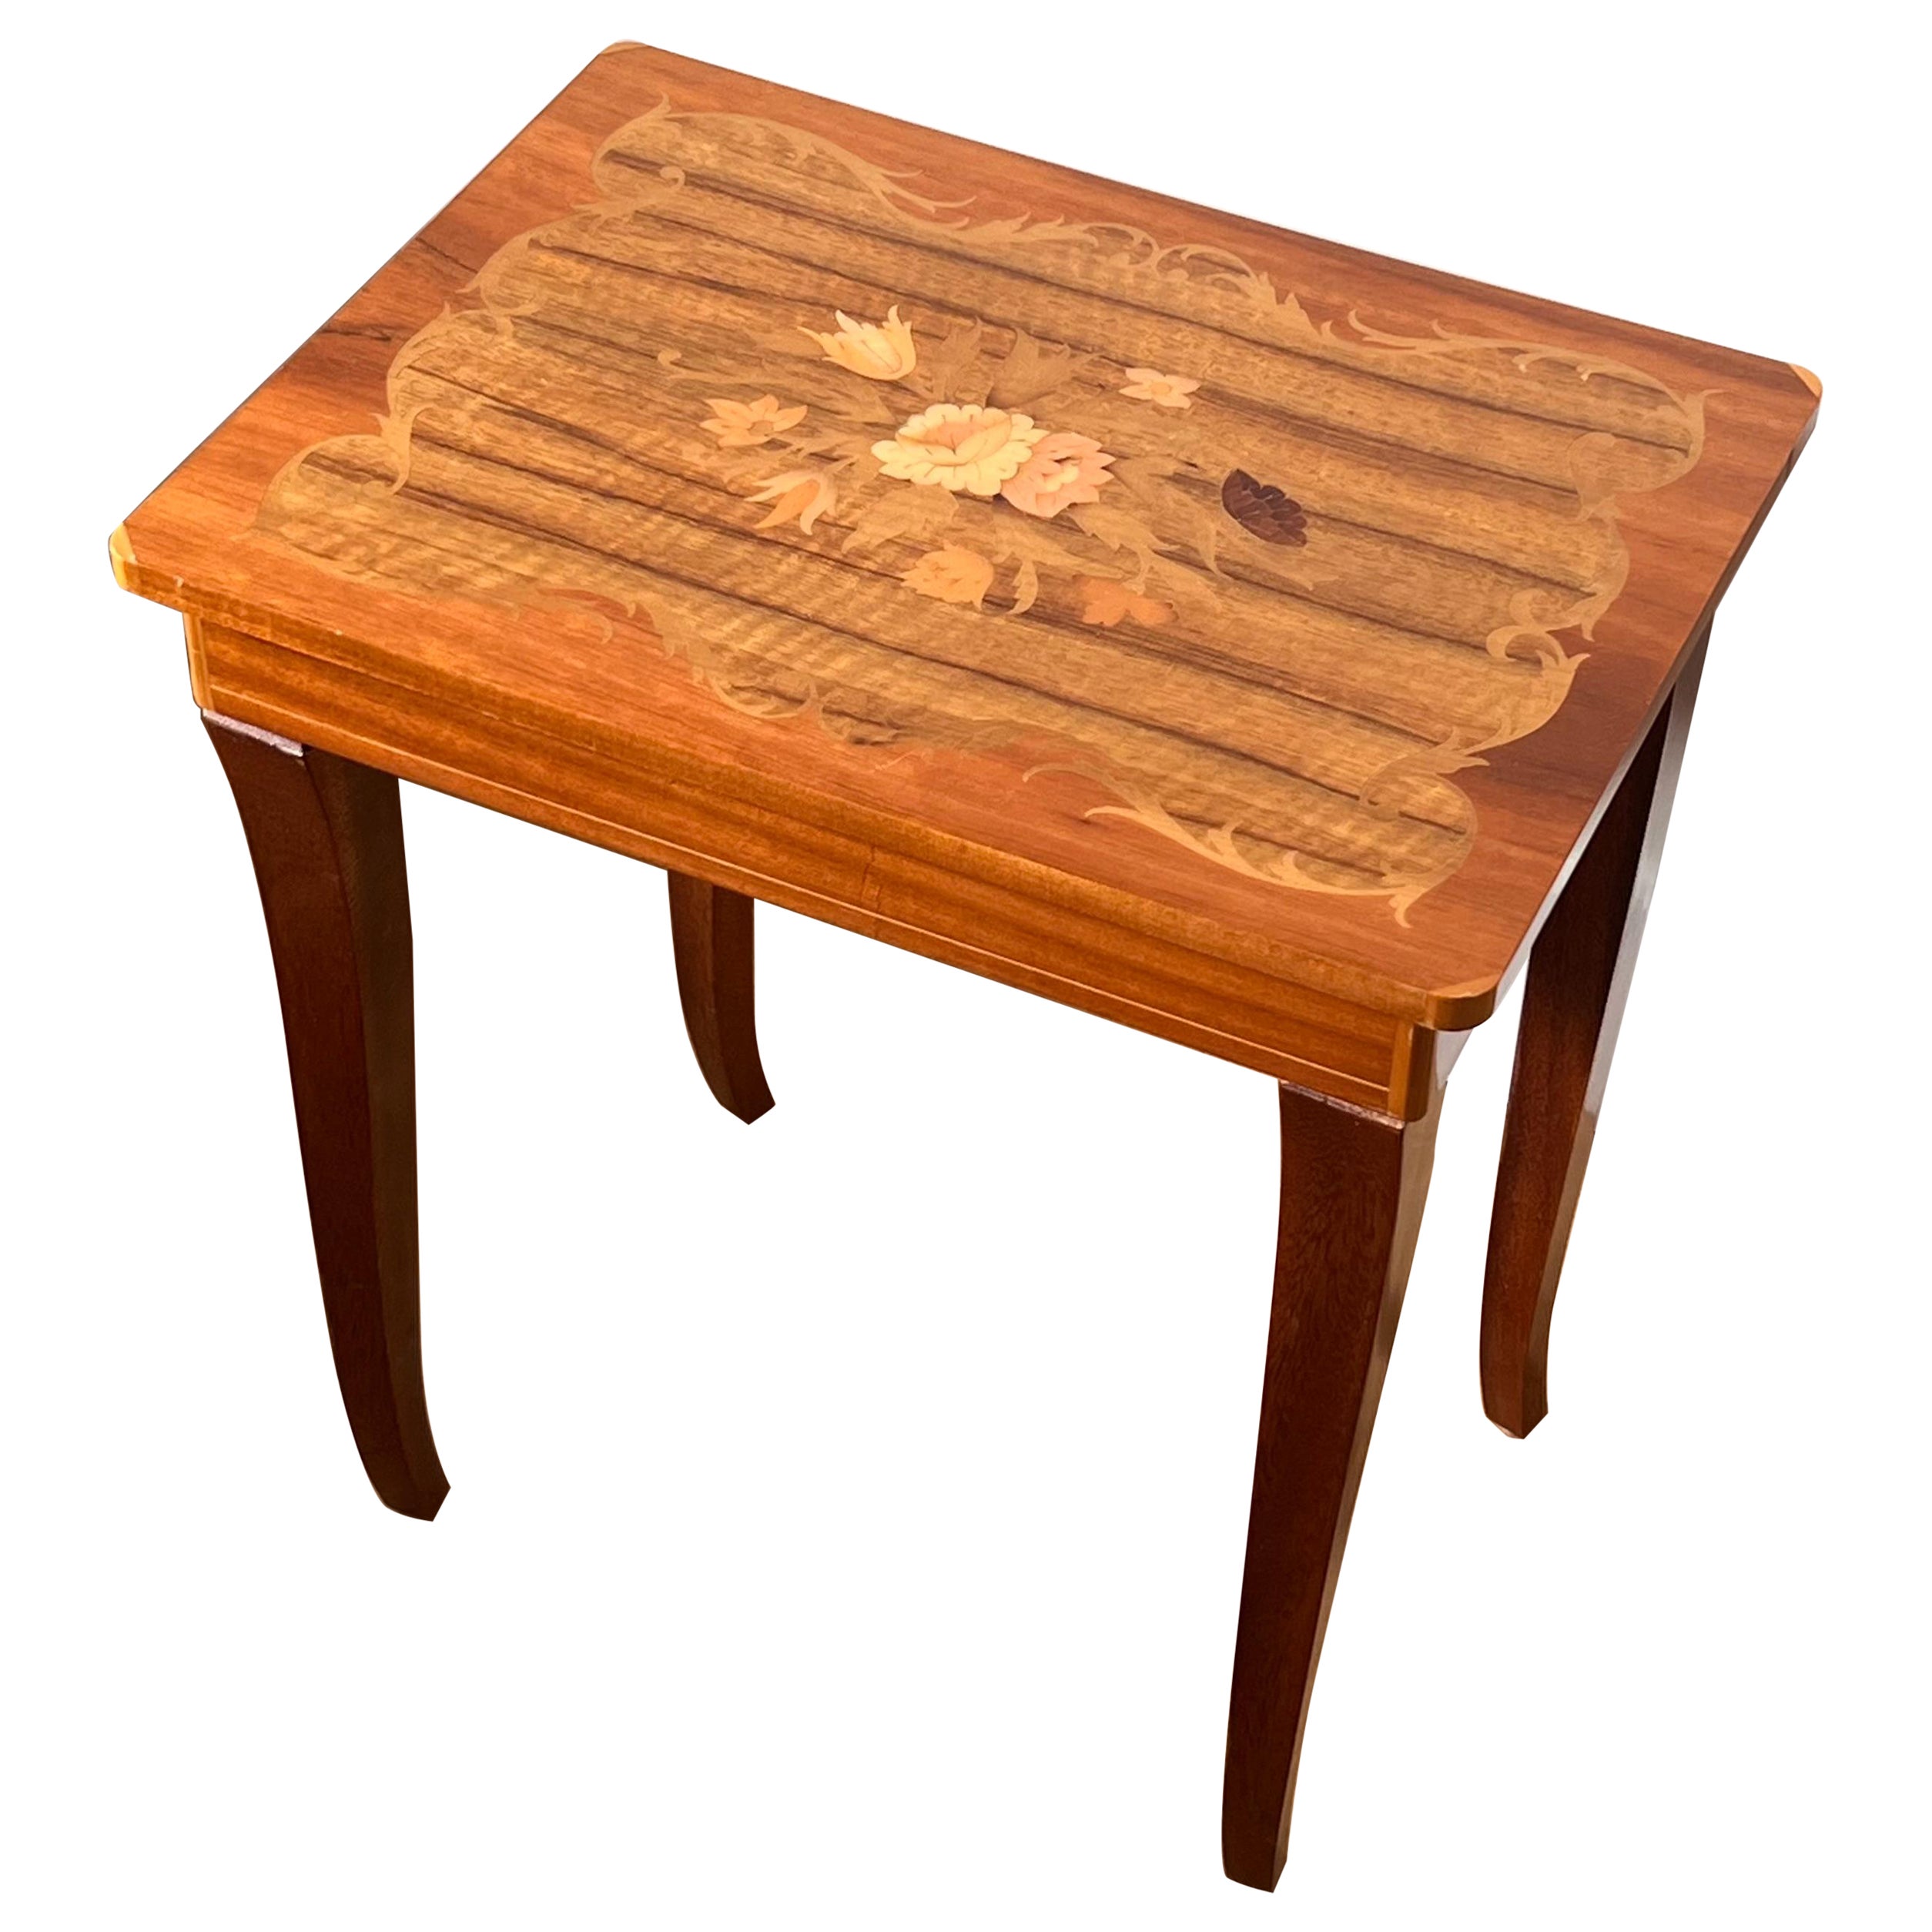 vintage Italian marquetry music-box side table, mid 20th c